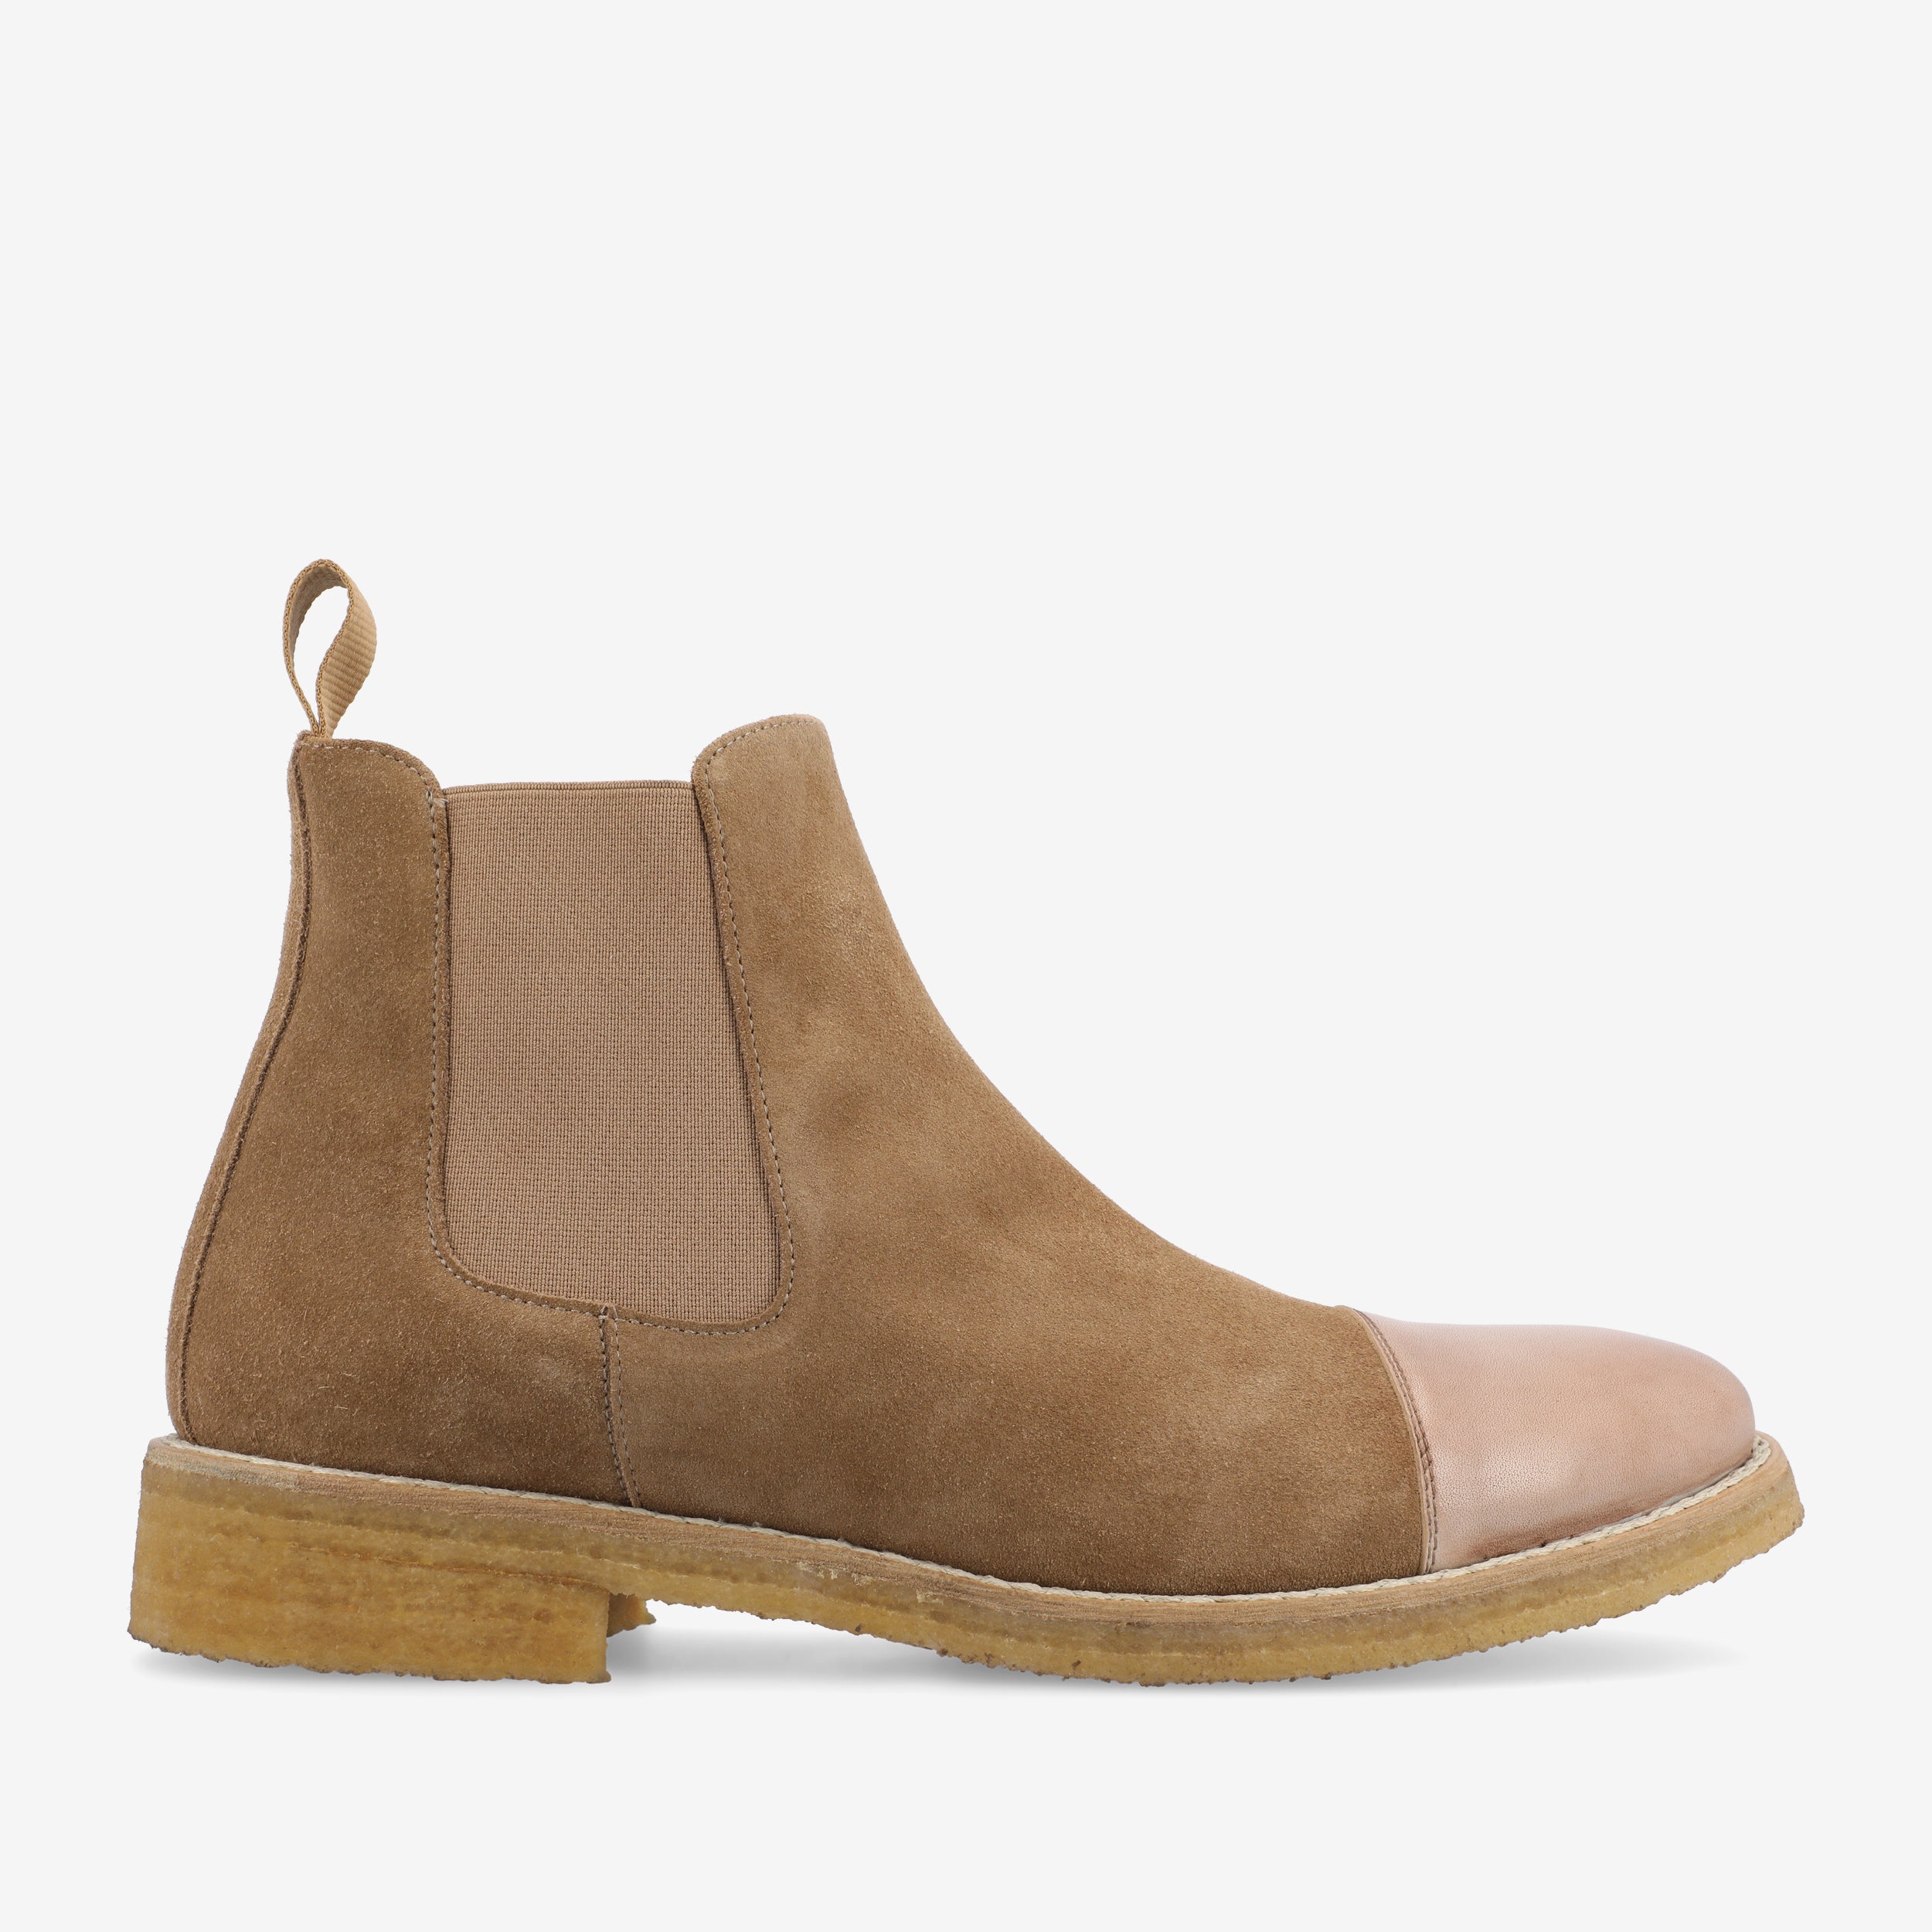 The Outback Boot in Ochre (Last Chance, Final Sale)